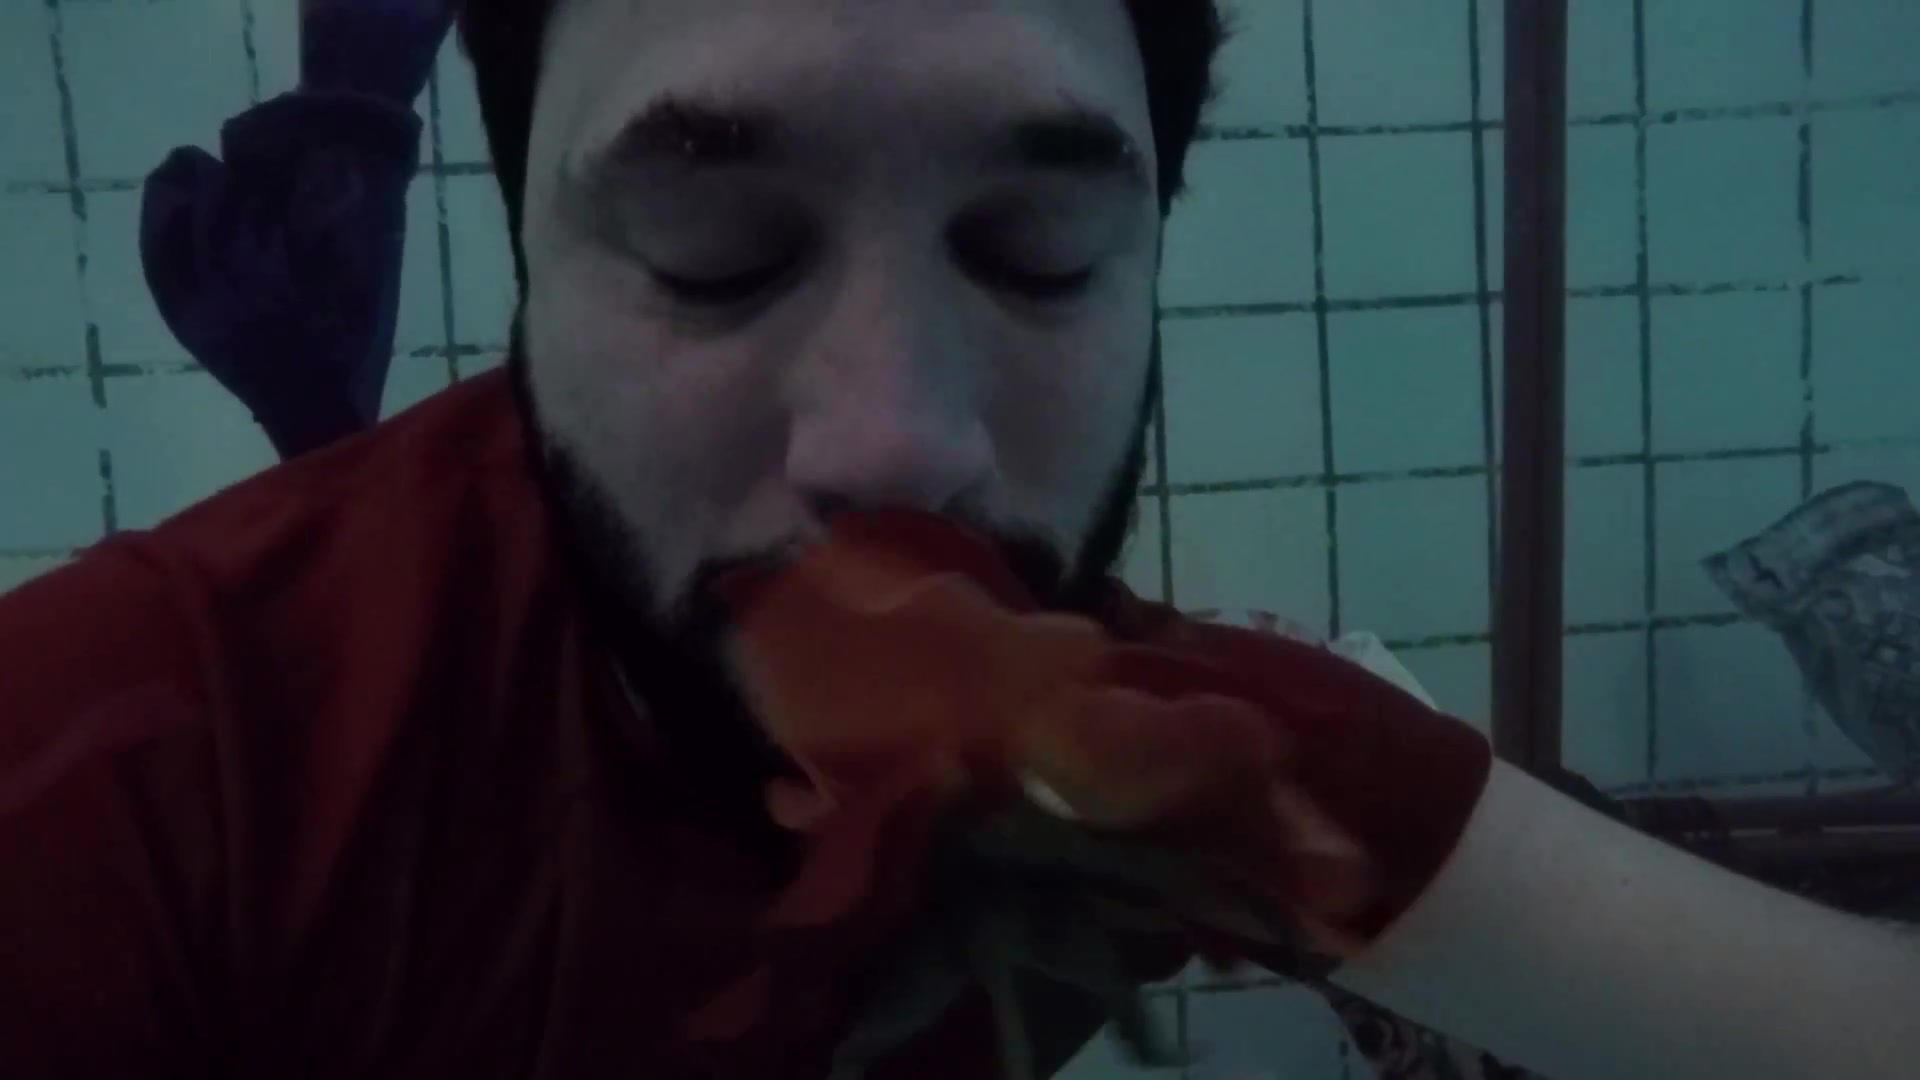 Barefaced bearded cutie underwater clothed